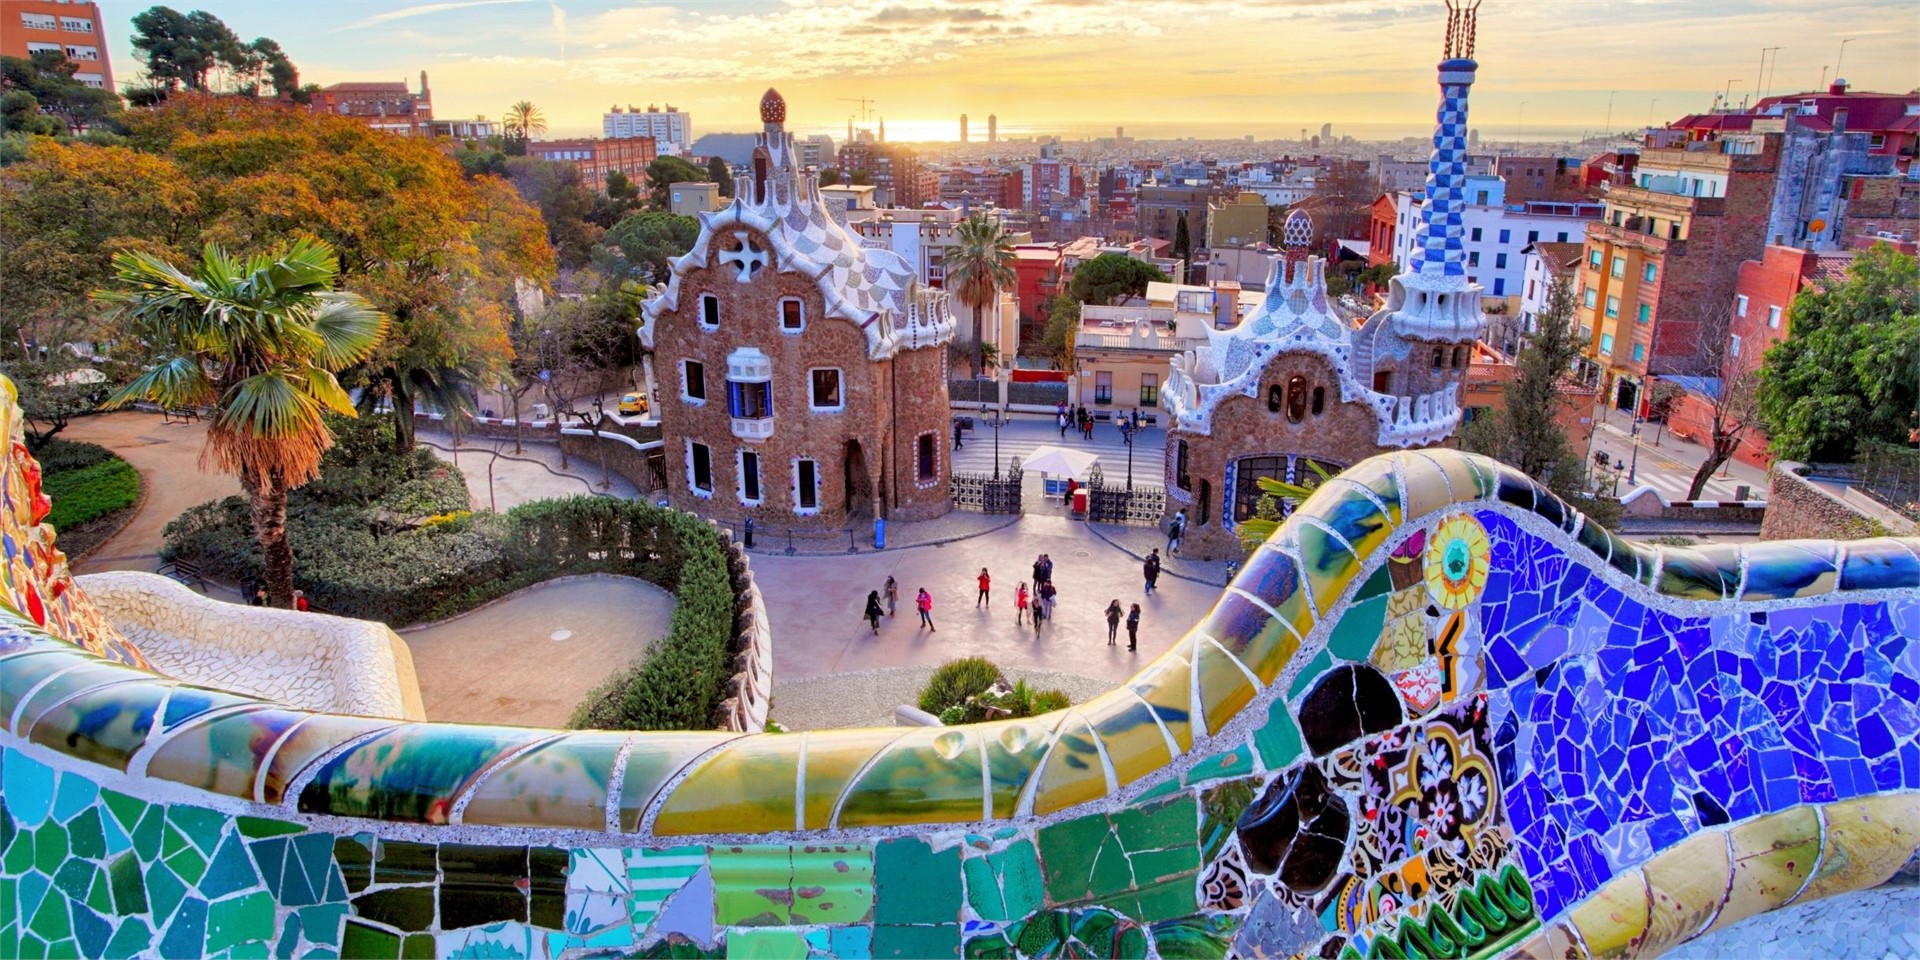 Hotels and accommodation in Barcelona, Spain